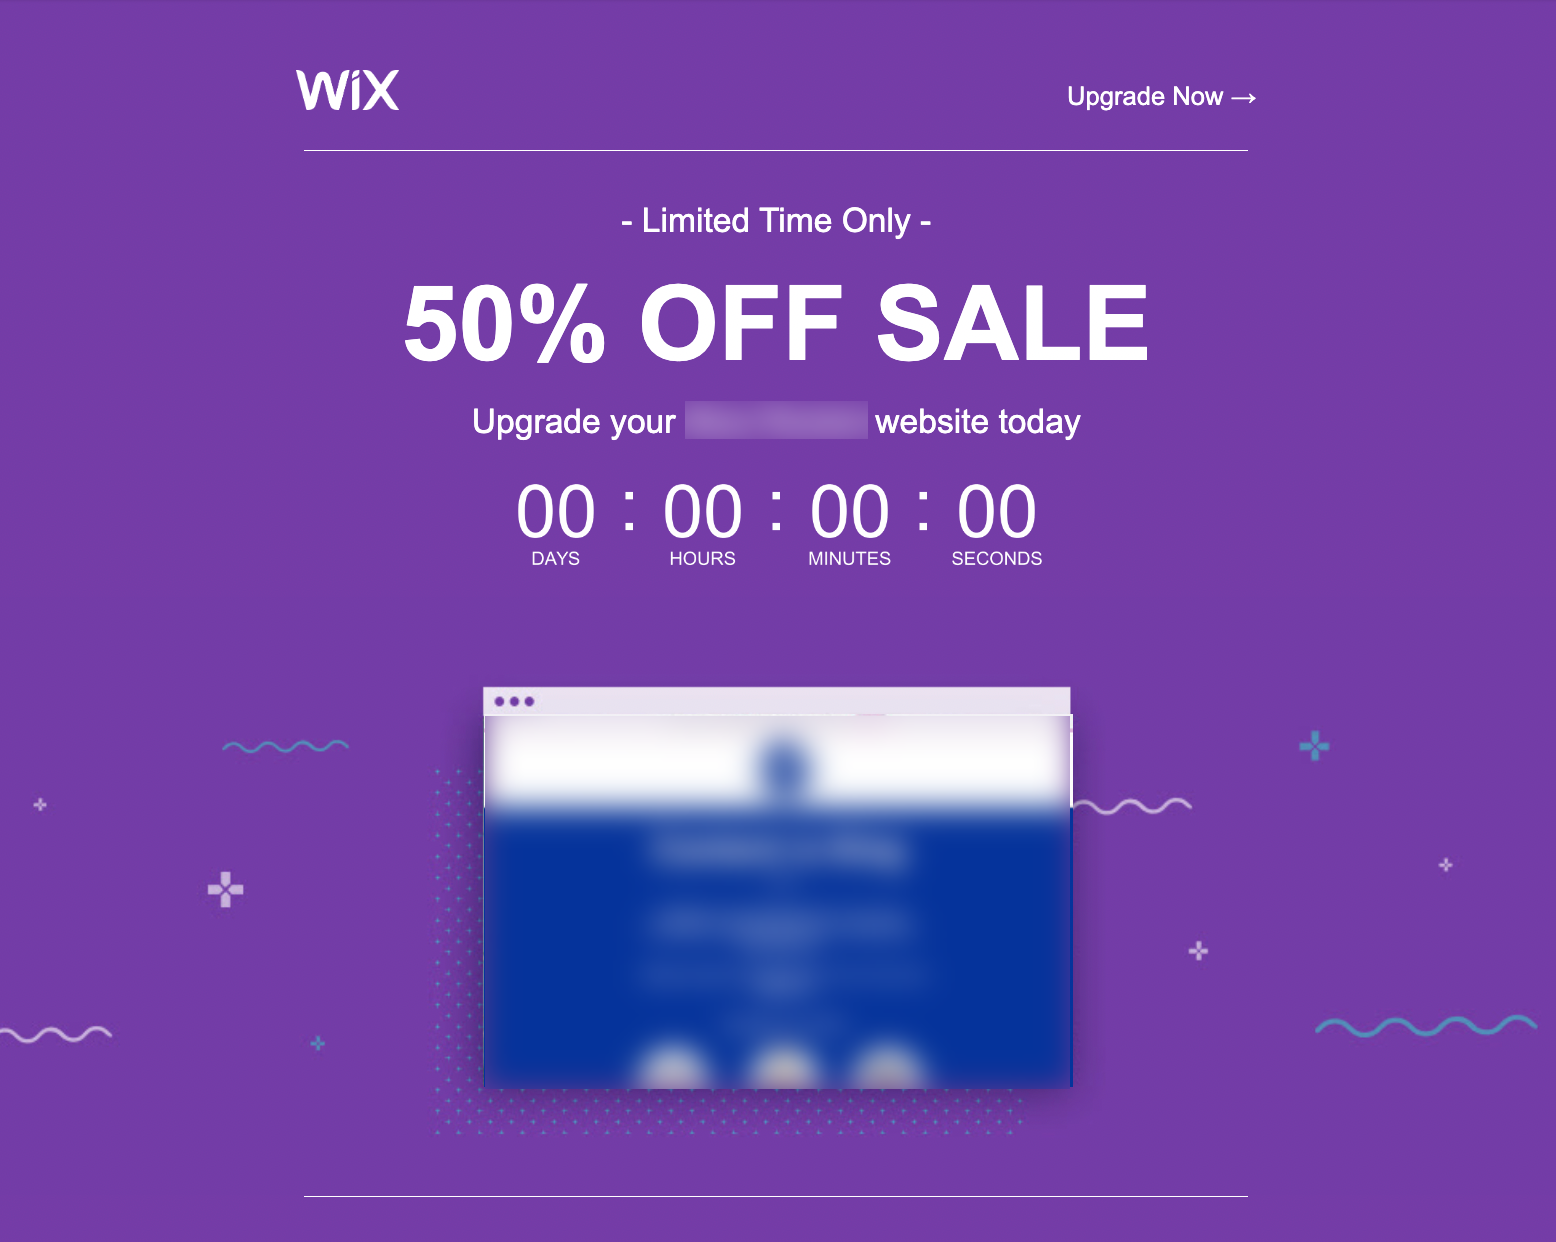 Wix promotional email example